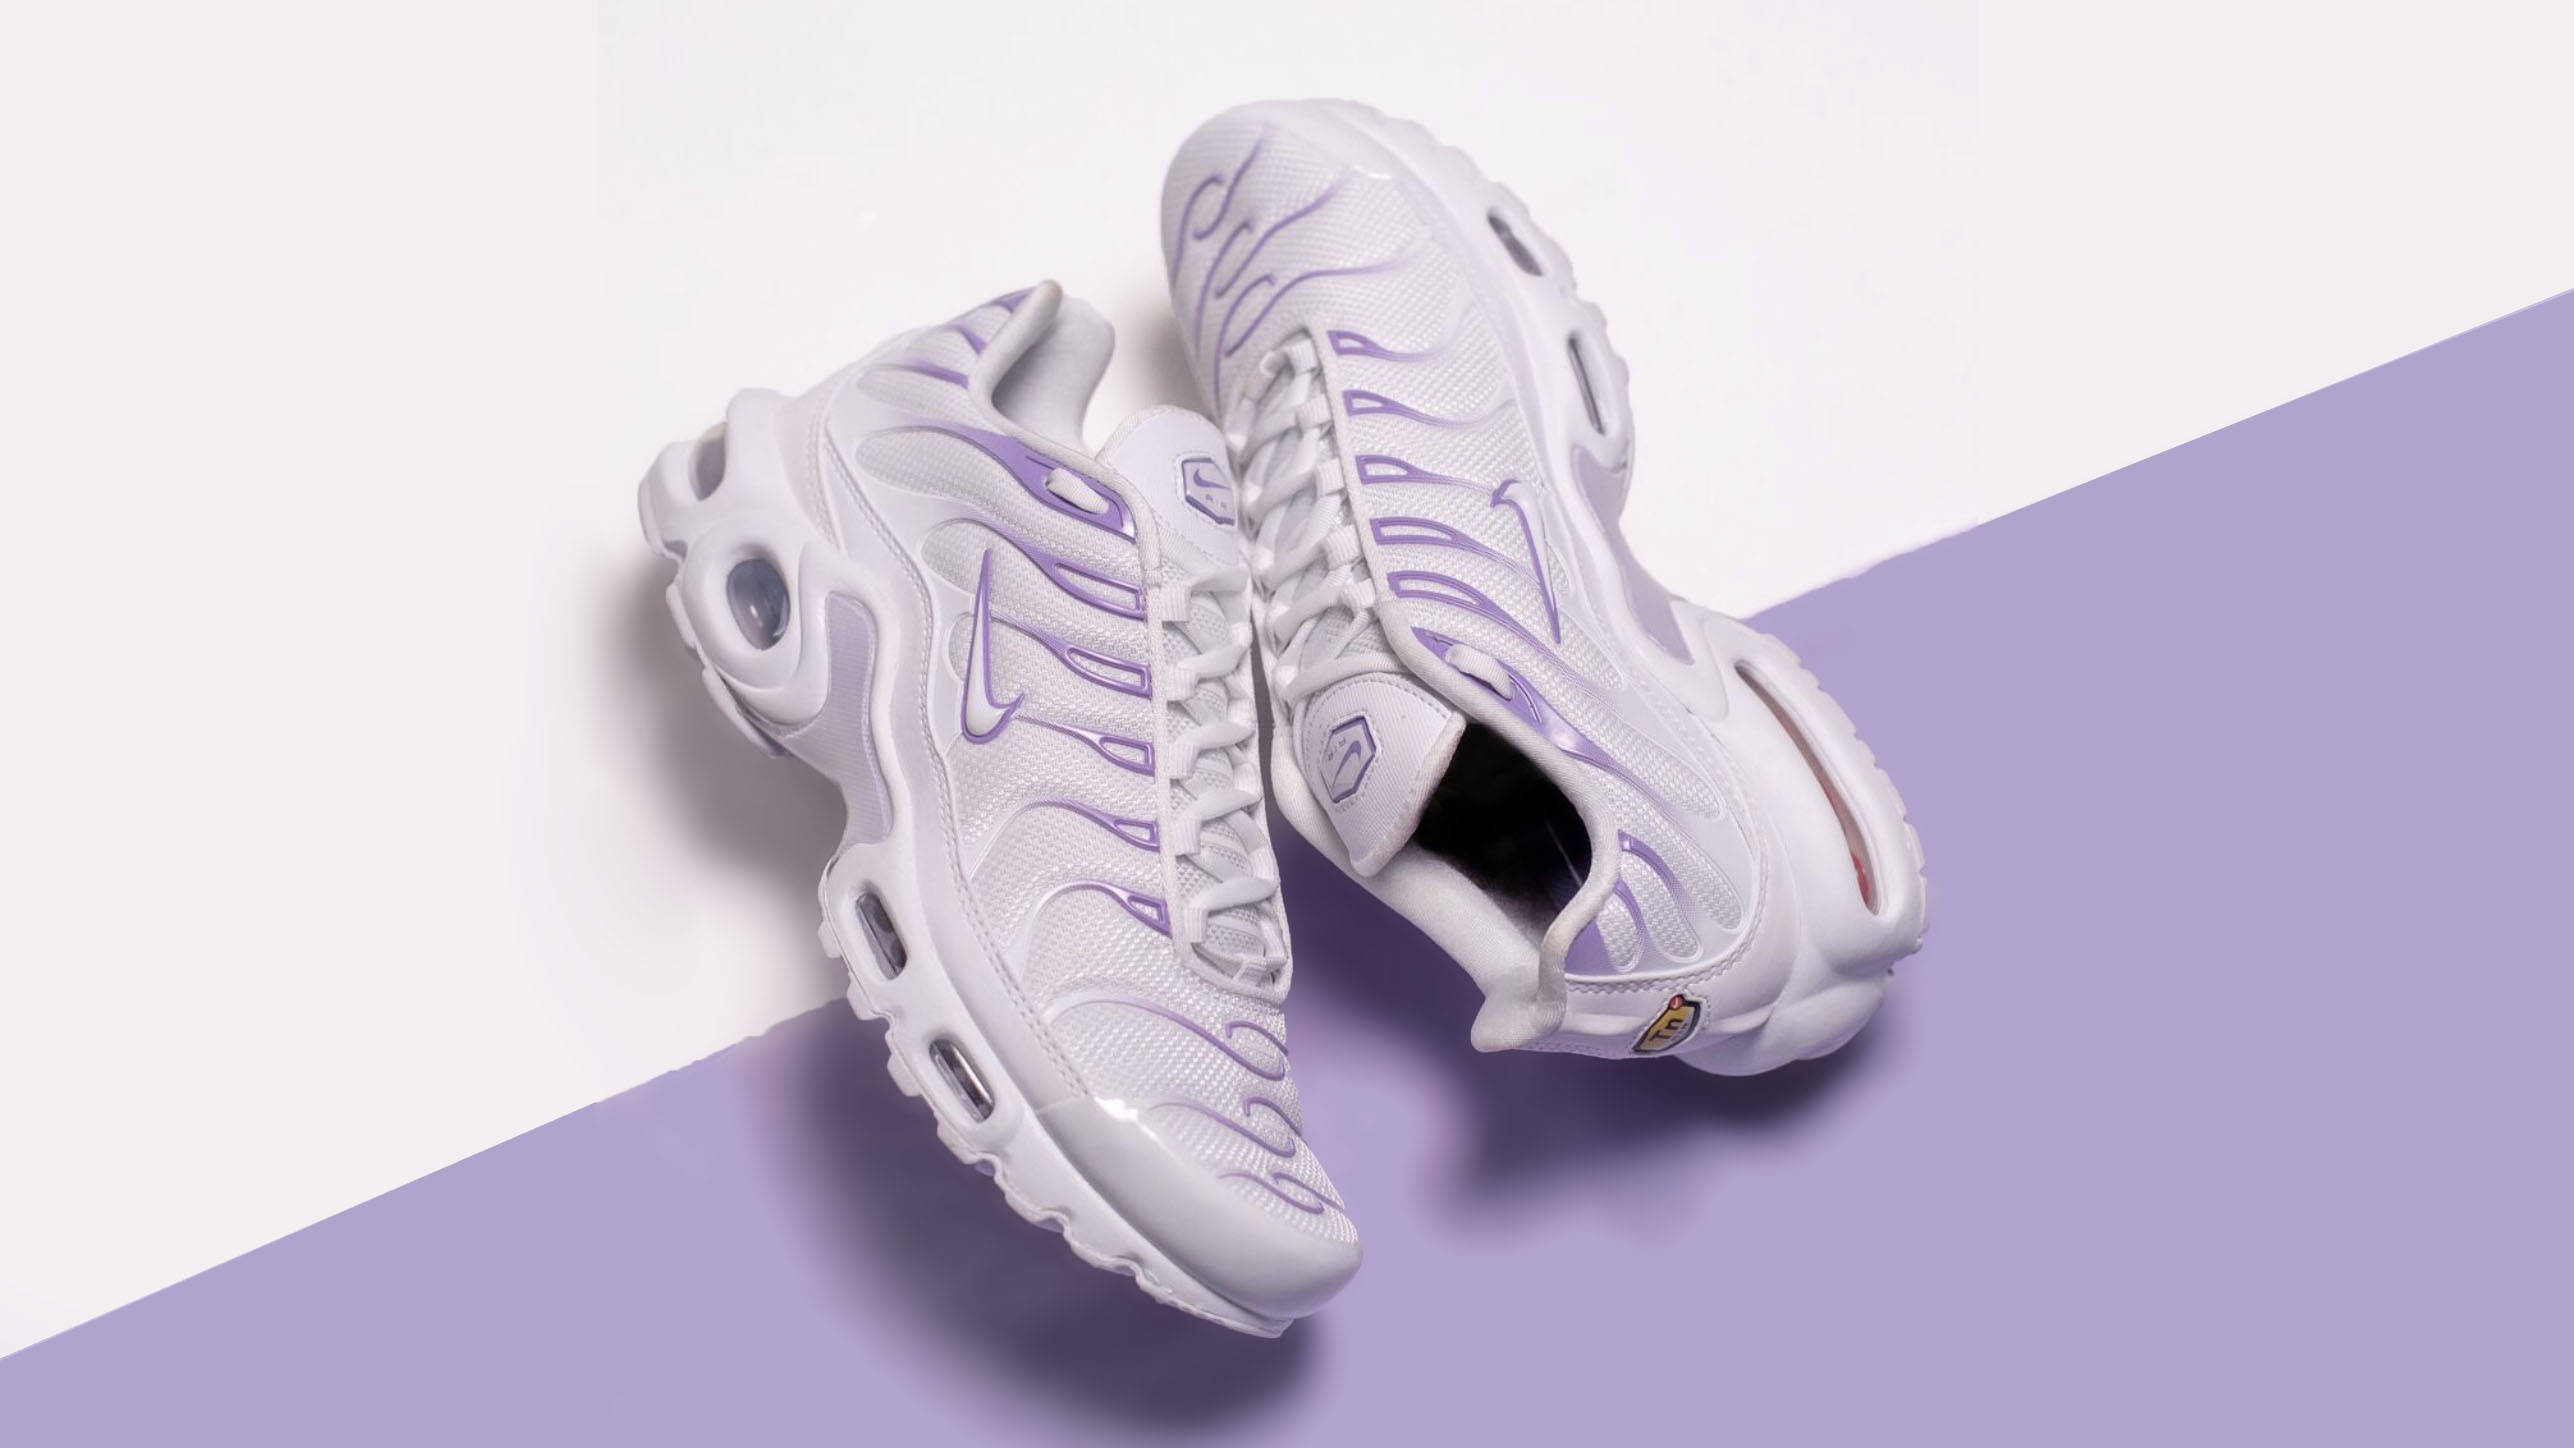 Anécdota Litoral Cerebro The Ultimate Nike TN Air Max Plus Guide For This Season | The Sole Supplier